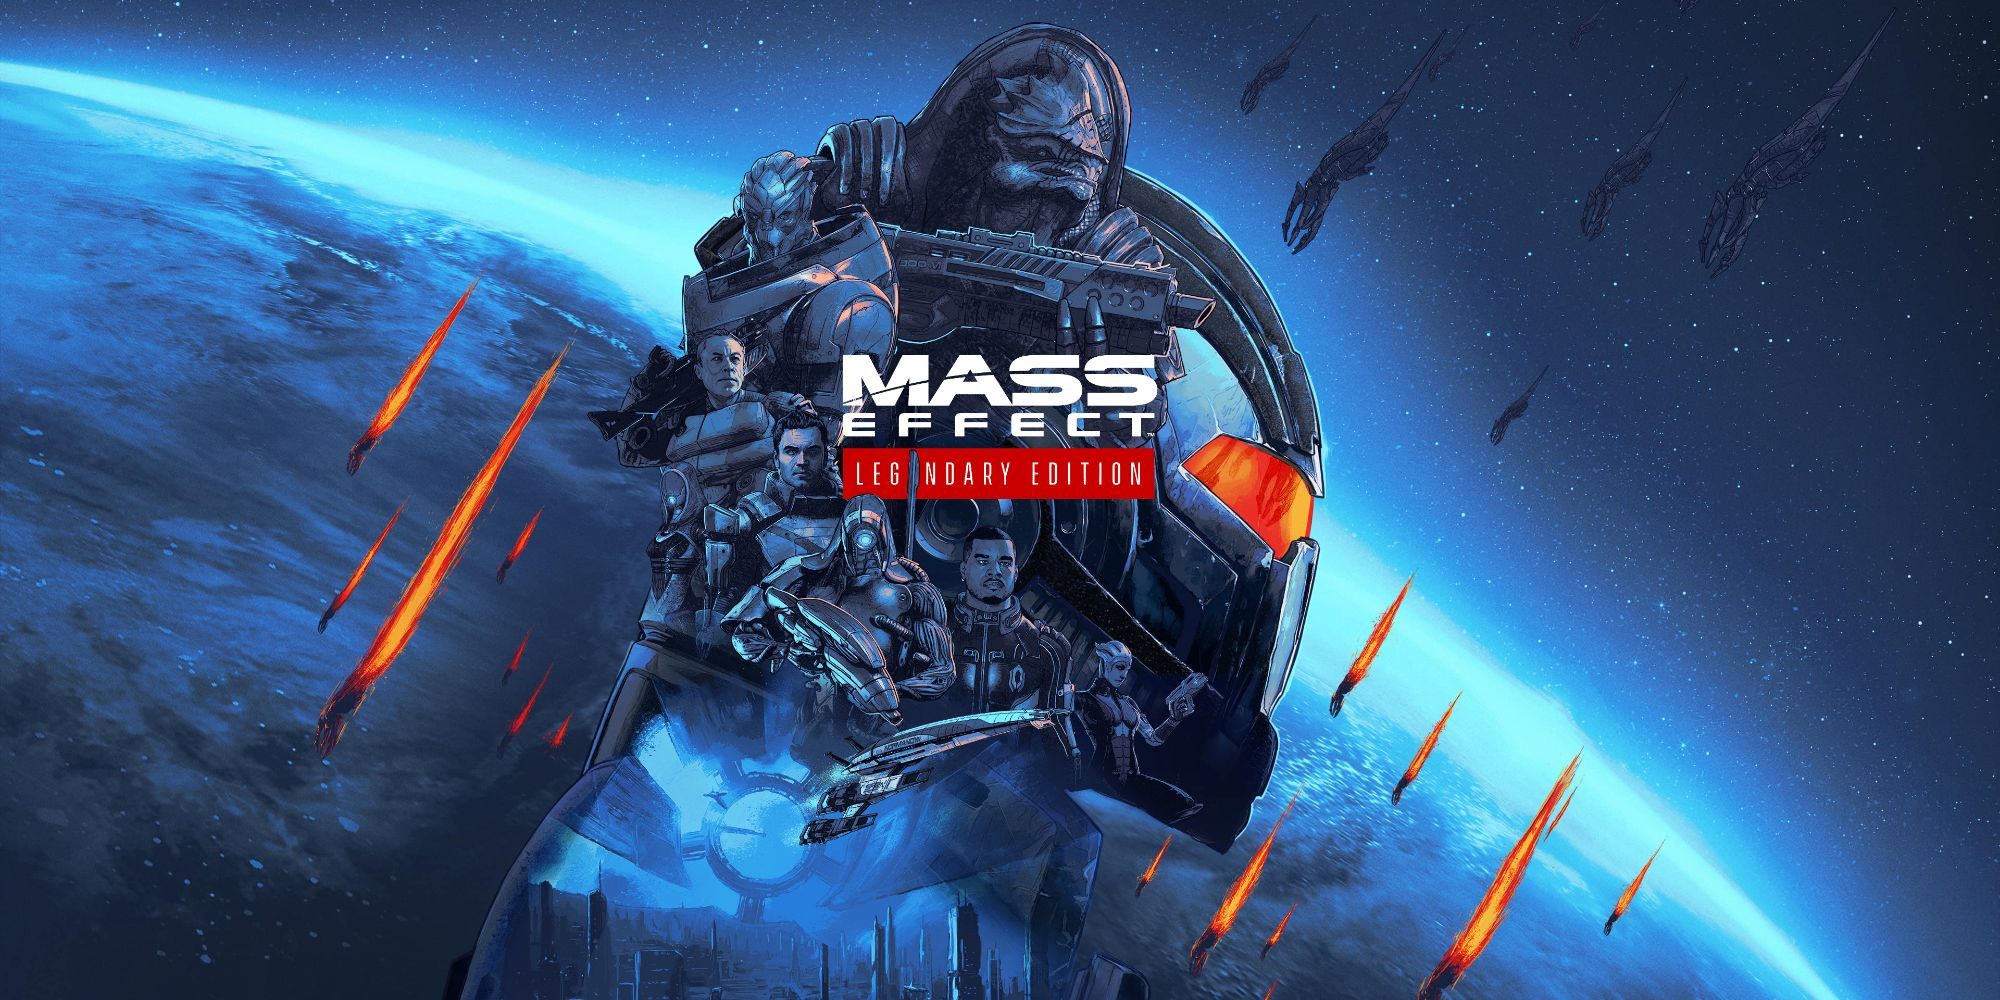 poster for the game Mass Effect Legendary Edition featuring Garrus Vakarian and other characters